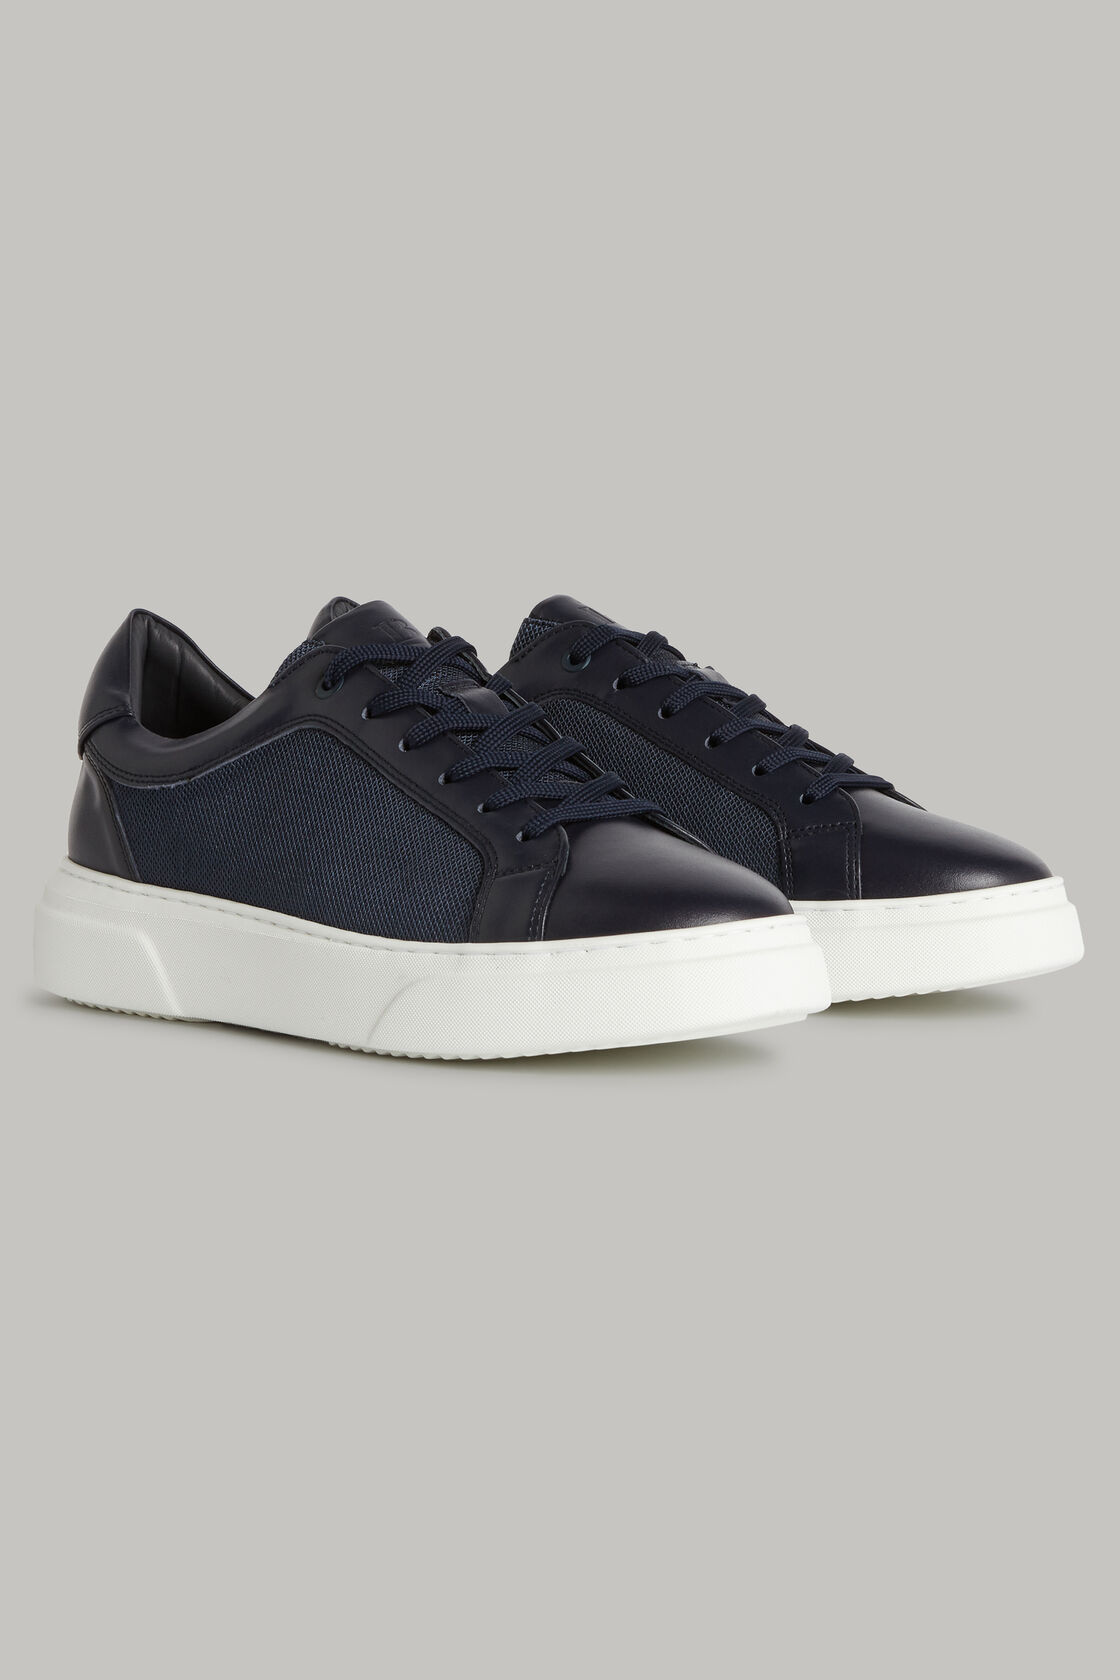 NAVY BLUE SNEAKERS IN TECHNICAL FABRIC AND LEATHER, , hi-res